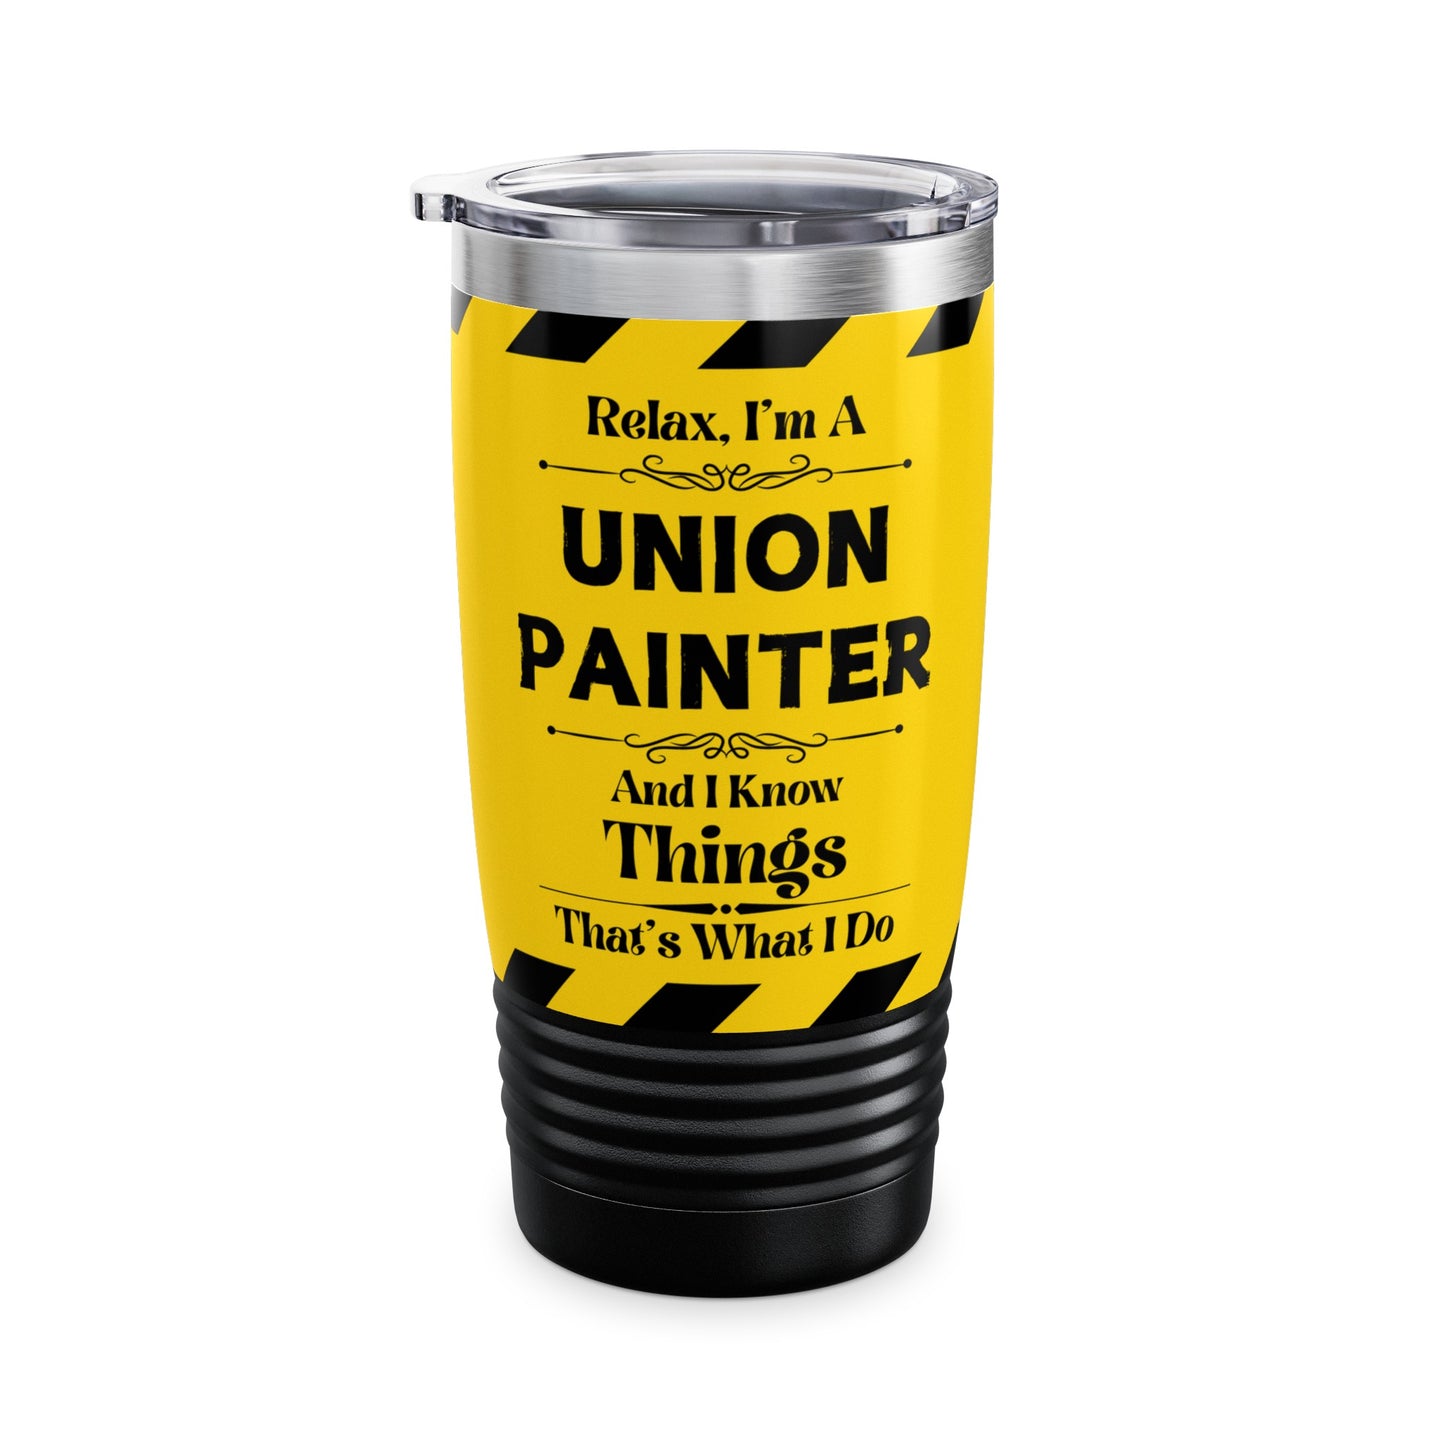 Relax, I'm A Union Painter, And I Know Things - Ringneck Tumbler, 20oz